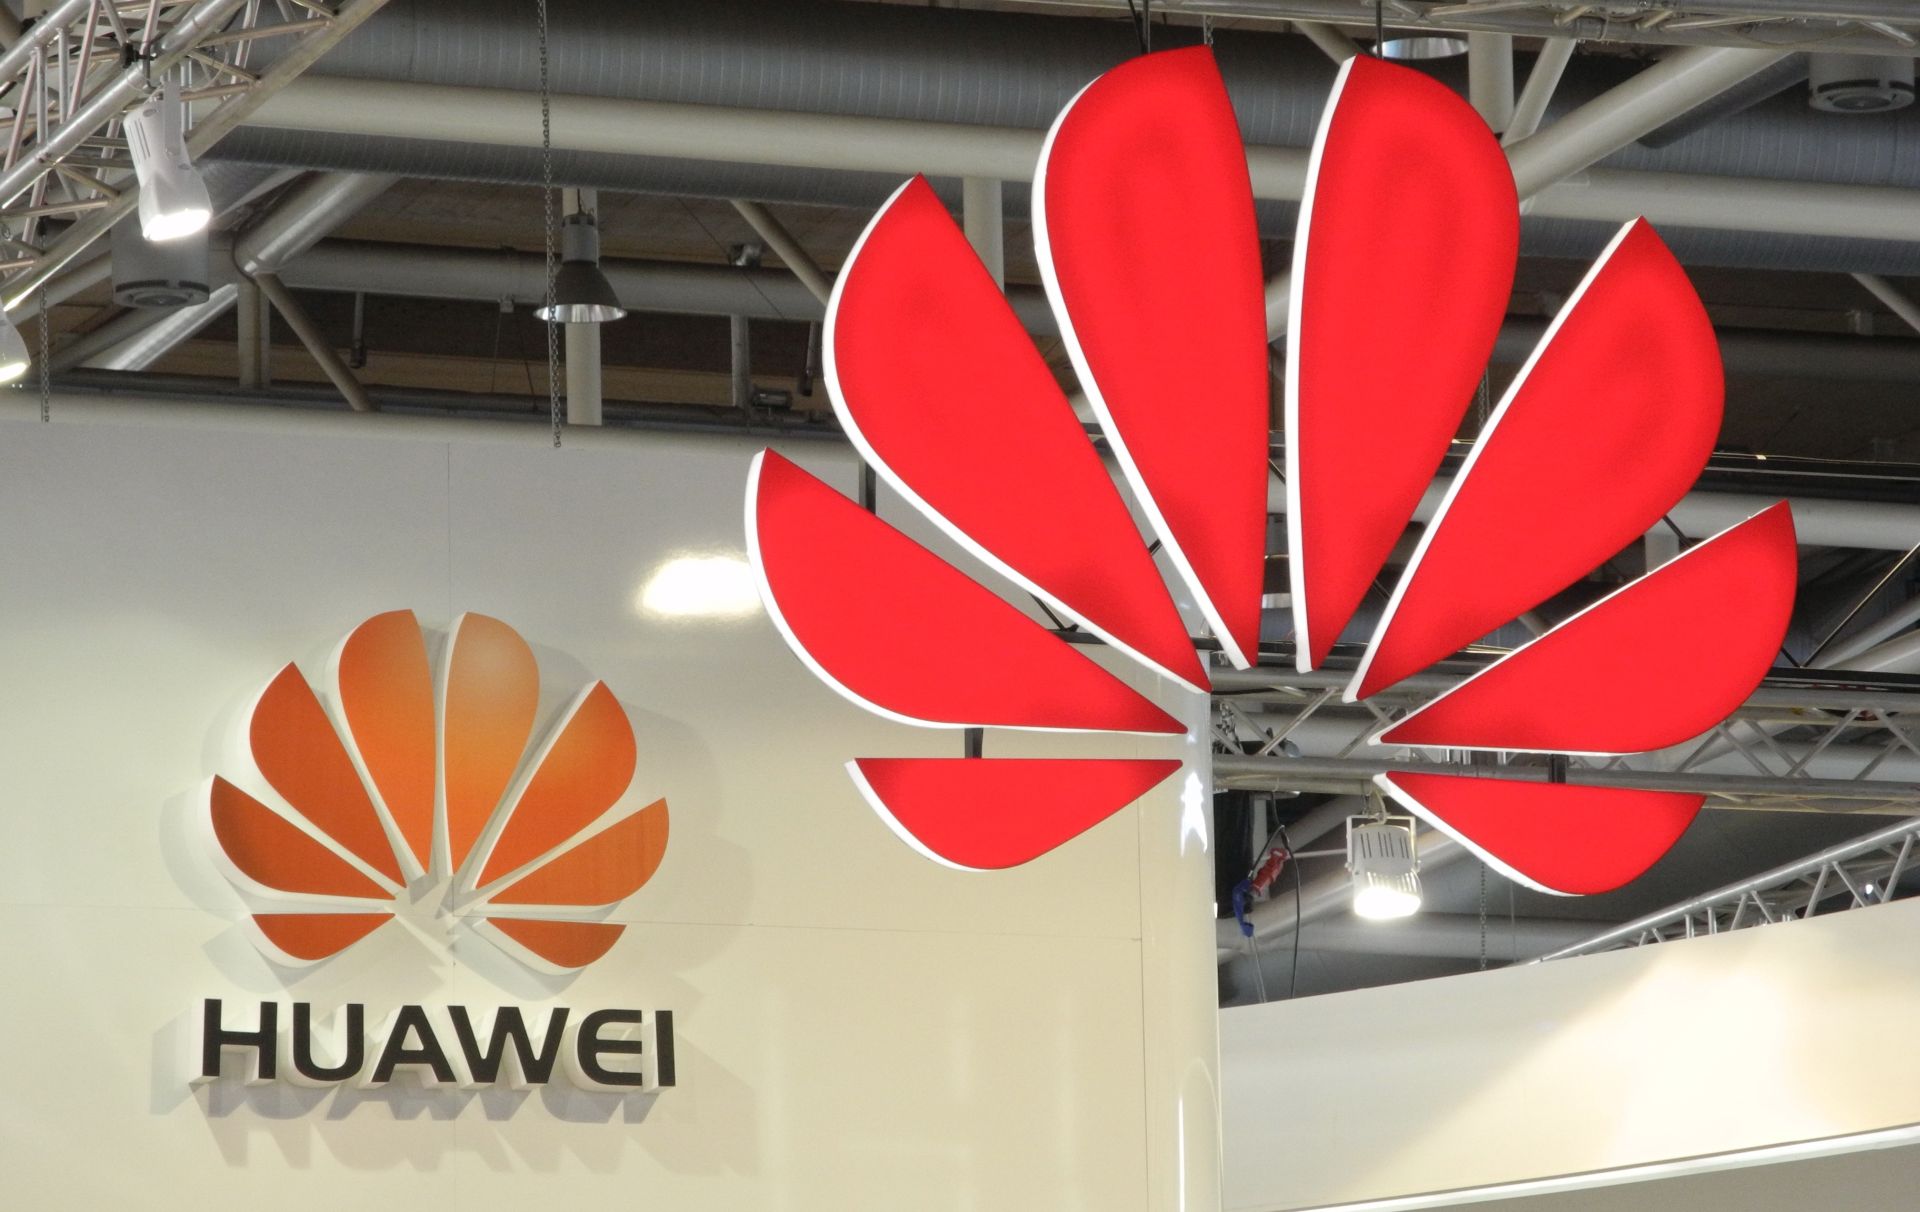 epa07585808 (FILE) - A general view of logos at the Chinese IT company and service provider Huawei, at the CeBit trade fair in Hanover, 06 March 2012 (reissued 20 May 2019). According to media reports on 20 May 2019, the US based multinational technology company Google halted business with Huawei in the wake of the Trump administration adding the Chinese telecommunication company to a trade blacklist over national security concerns. Huawei will lose access to updates for the Android operating system.  EPA/MAURITZ ANTIN